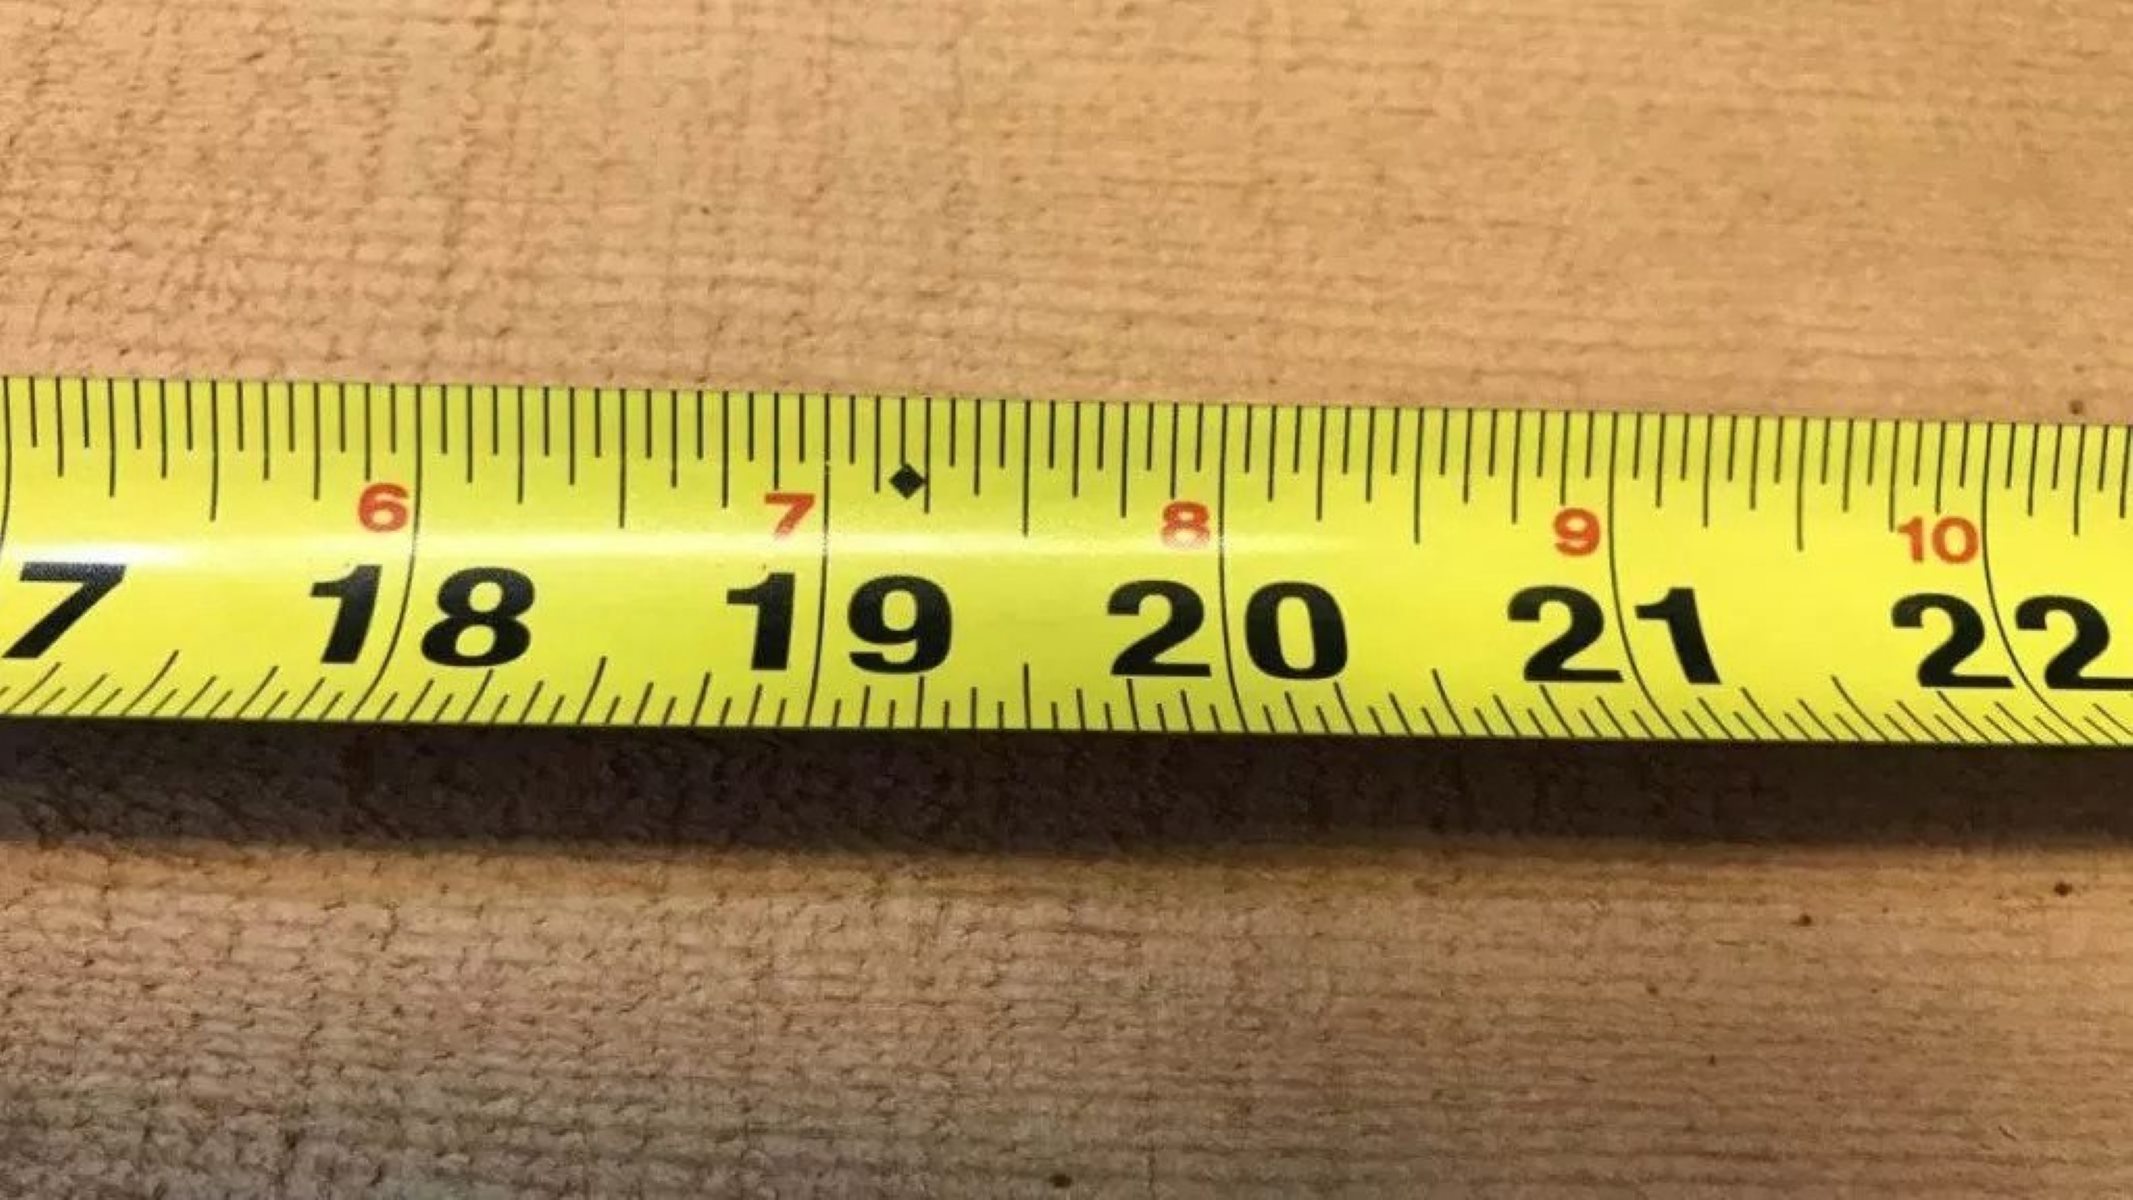 What Is A Black Diamond On A Measuring Tape For